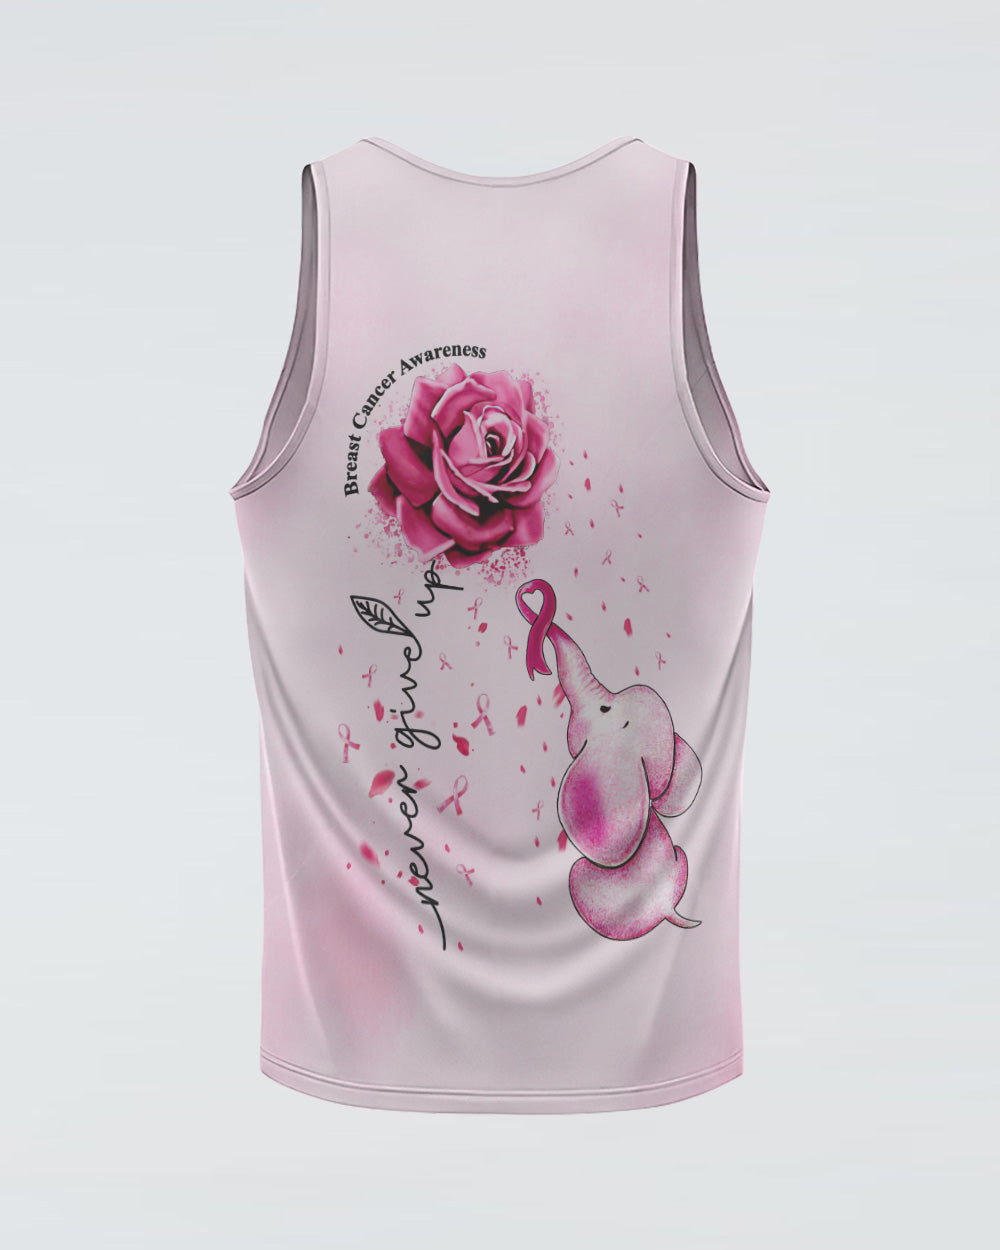 Never Give Up Rose Elephant Women's Breast Cancer Awareness Tanks